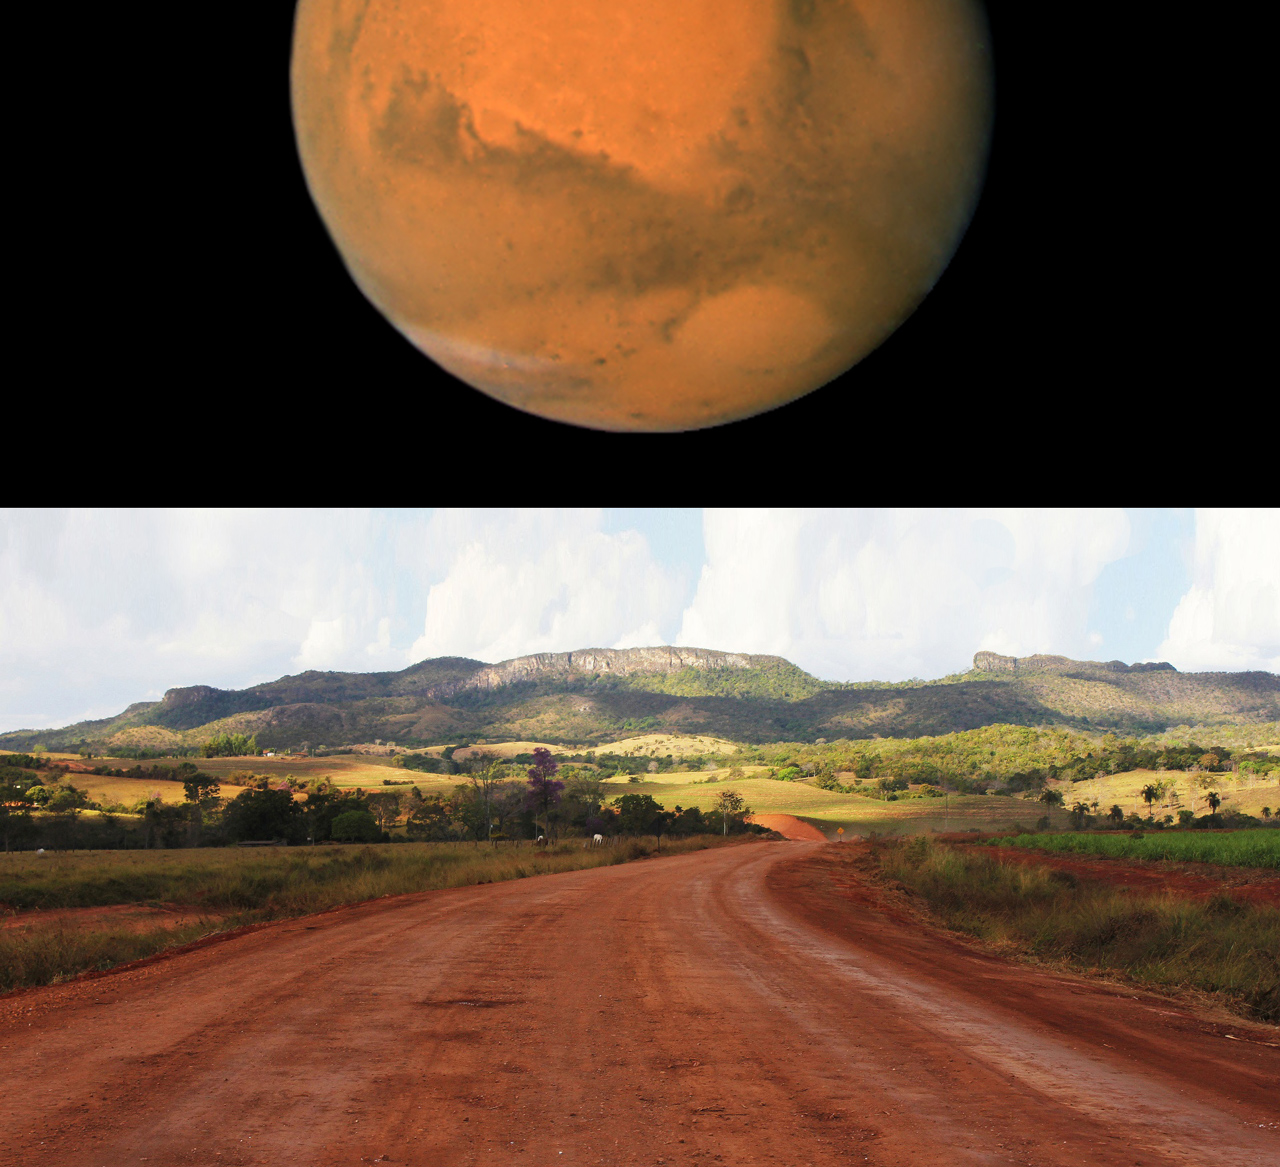 Mars compared with red road